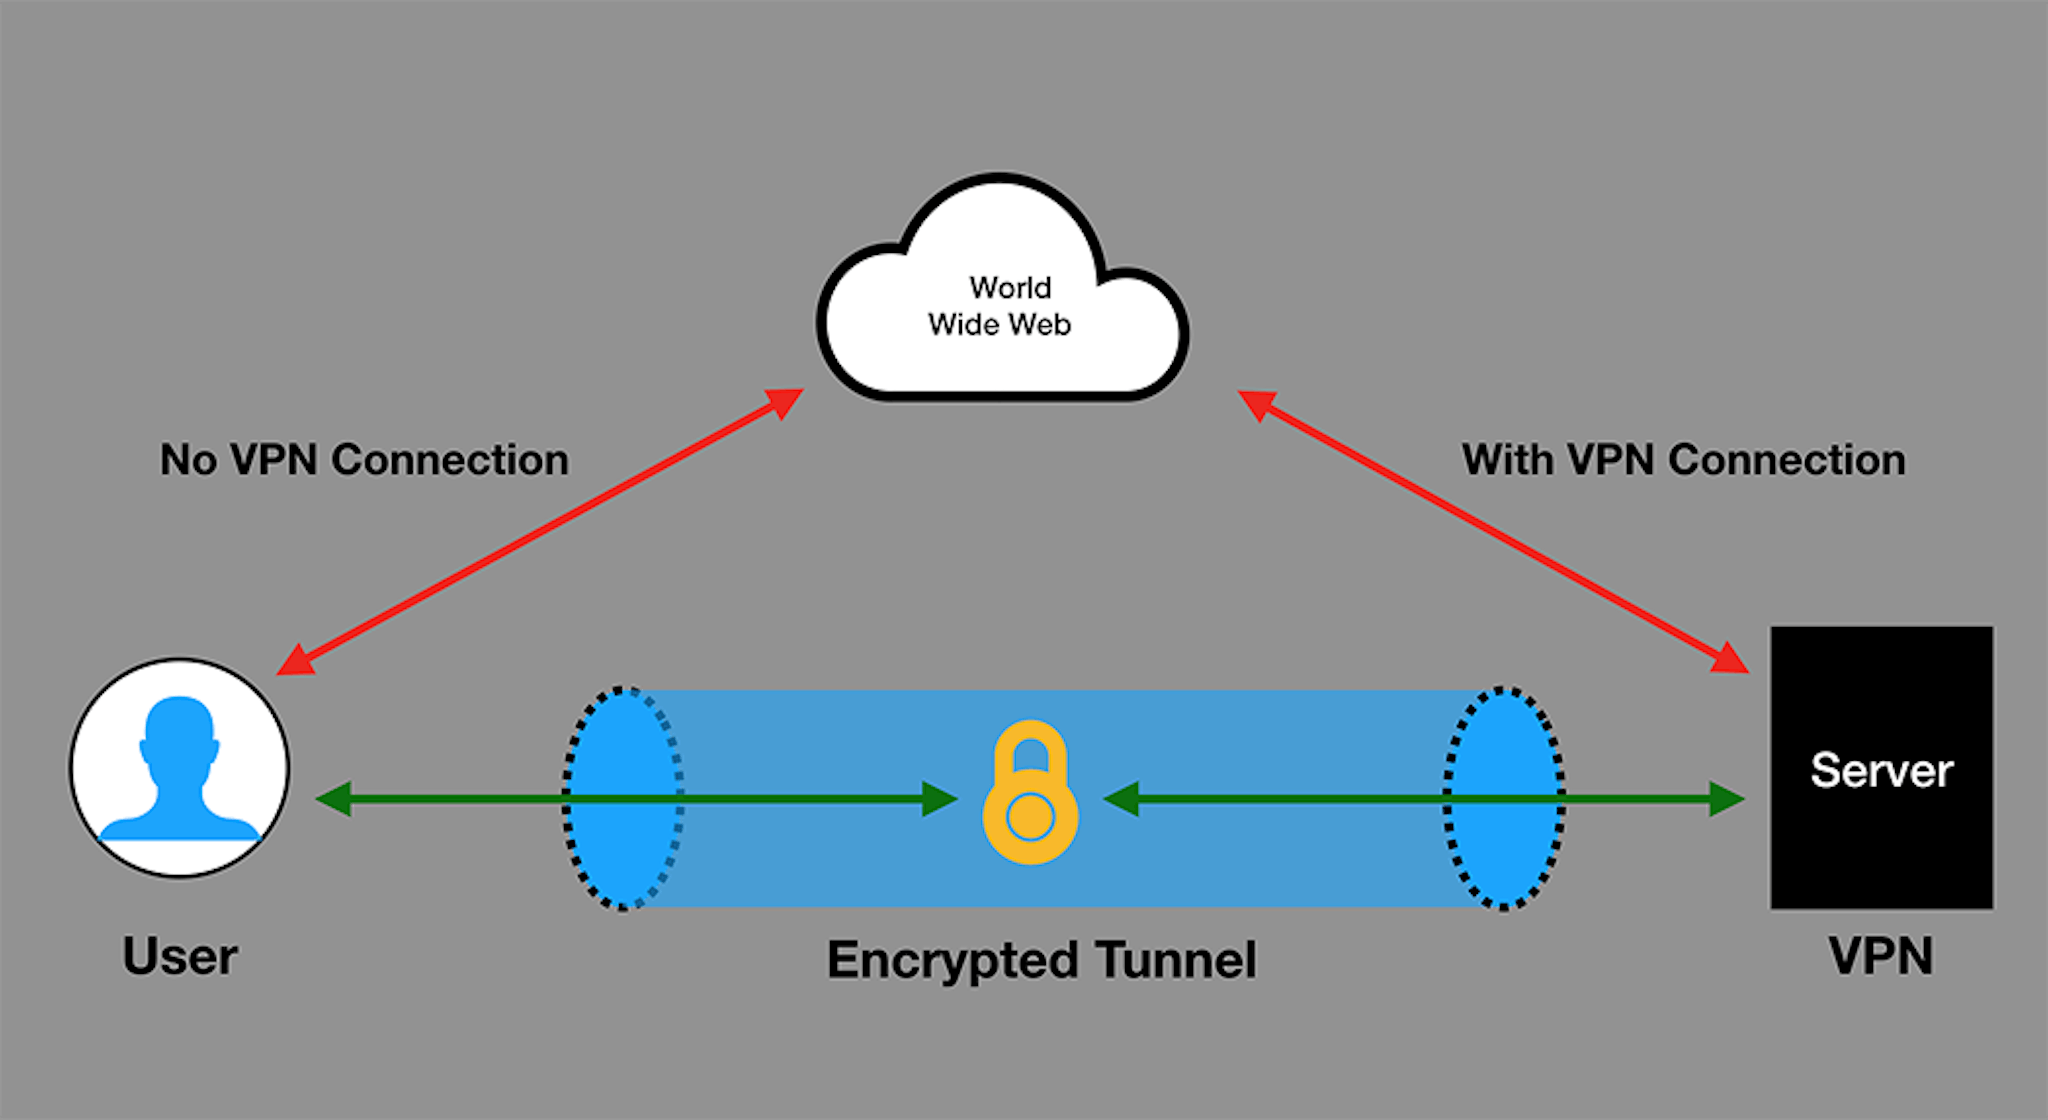 Figure 2. A VPN creates a virtual tunnel through the Internet, which is encrypted. This is between the VPN provider and the user (shown in green arrows). Outside of the VPN, the user traffic is not encrypted. When accessing a website (world wide web) that is outside of the VPN's network, traffic is not encrypted (red arrows).